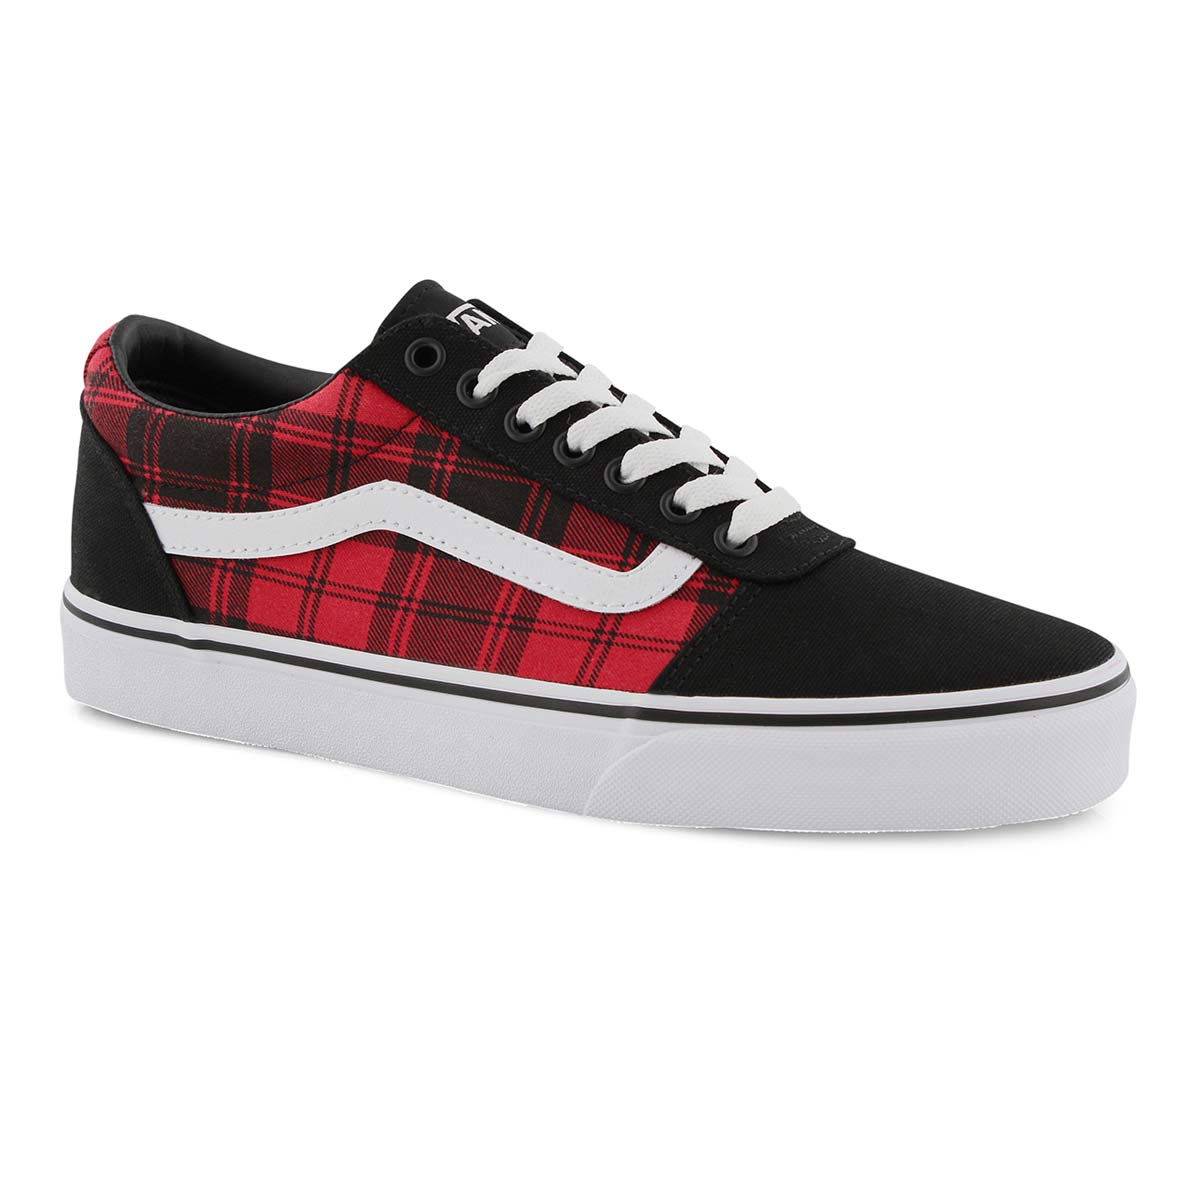 black vans with red laces